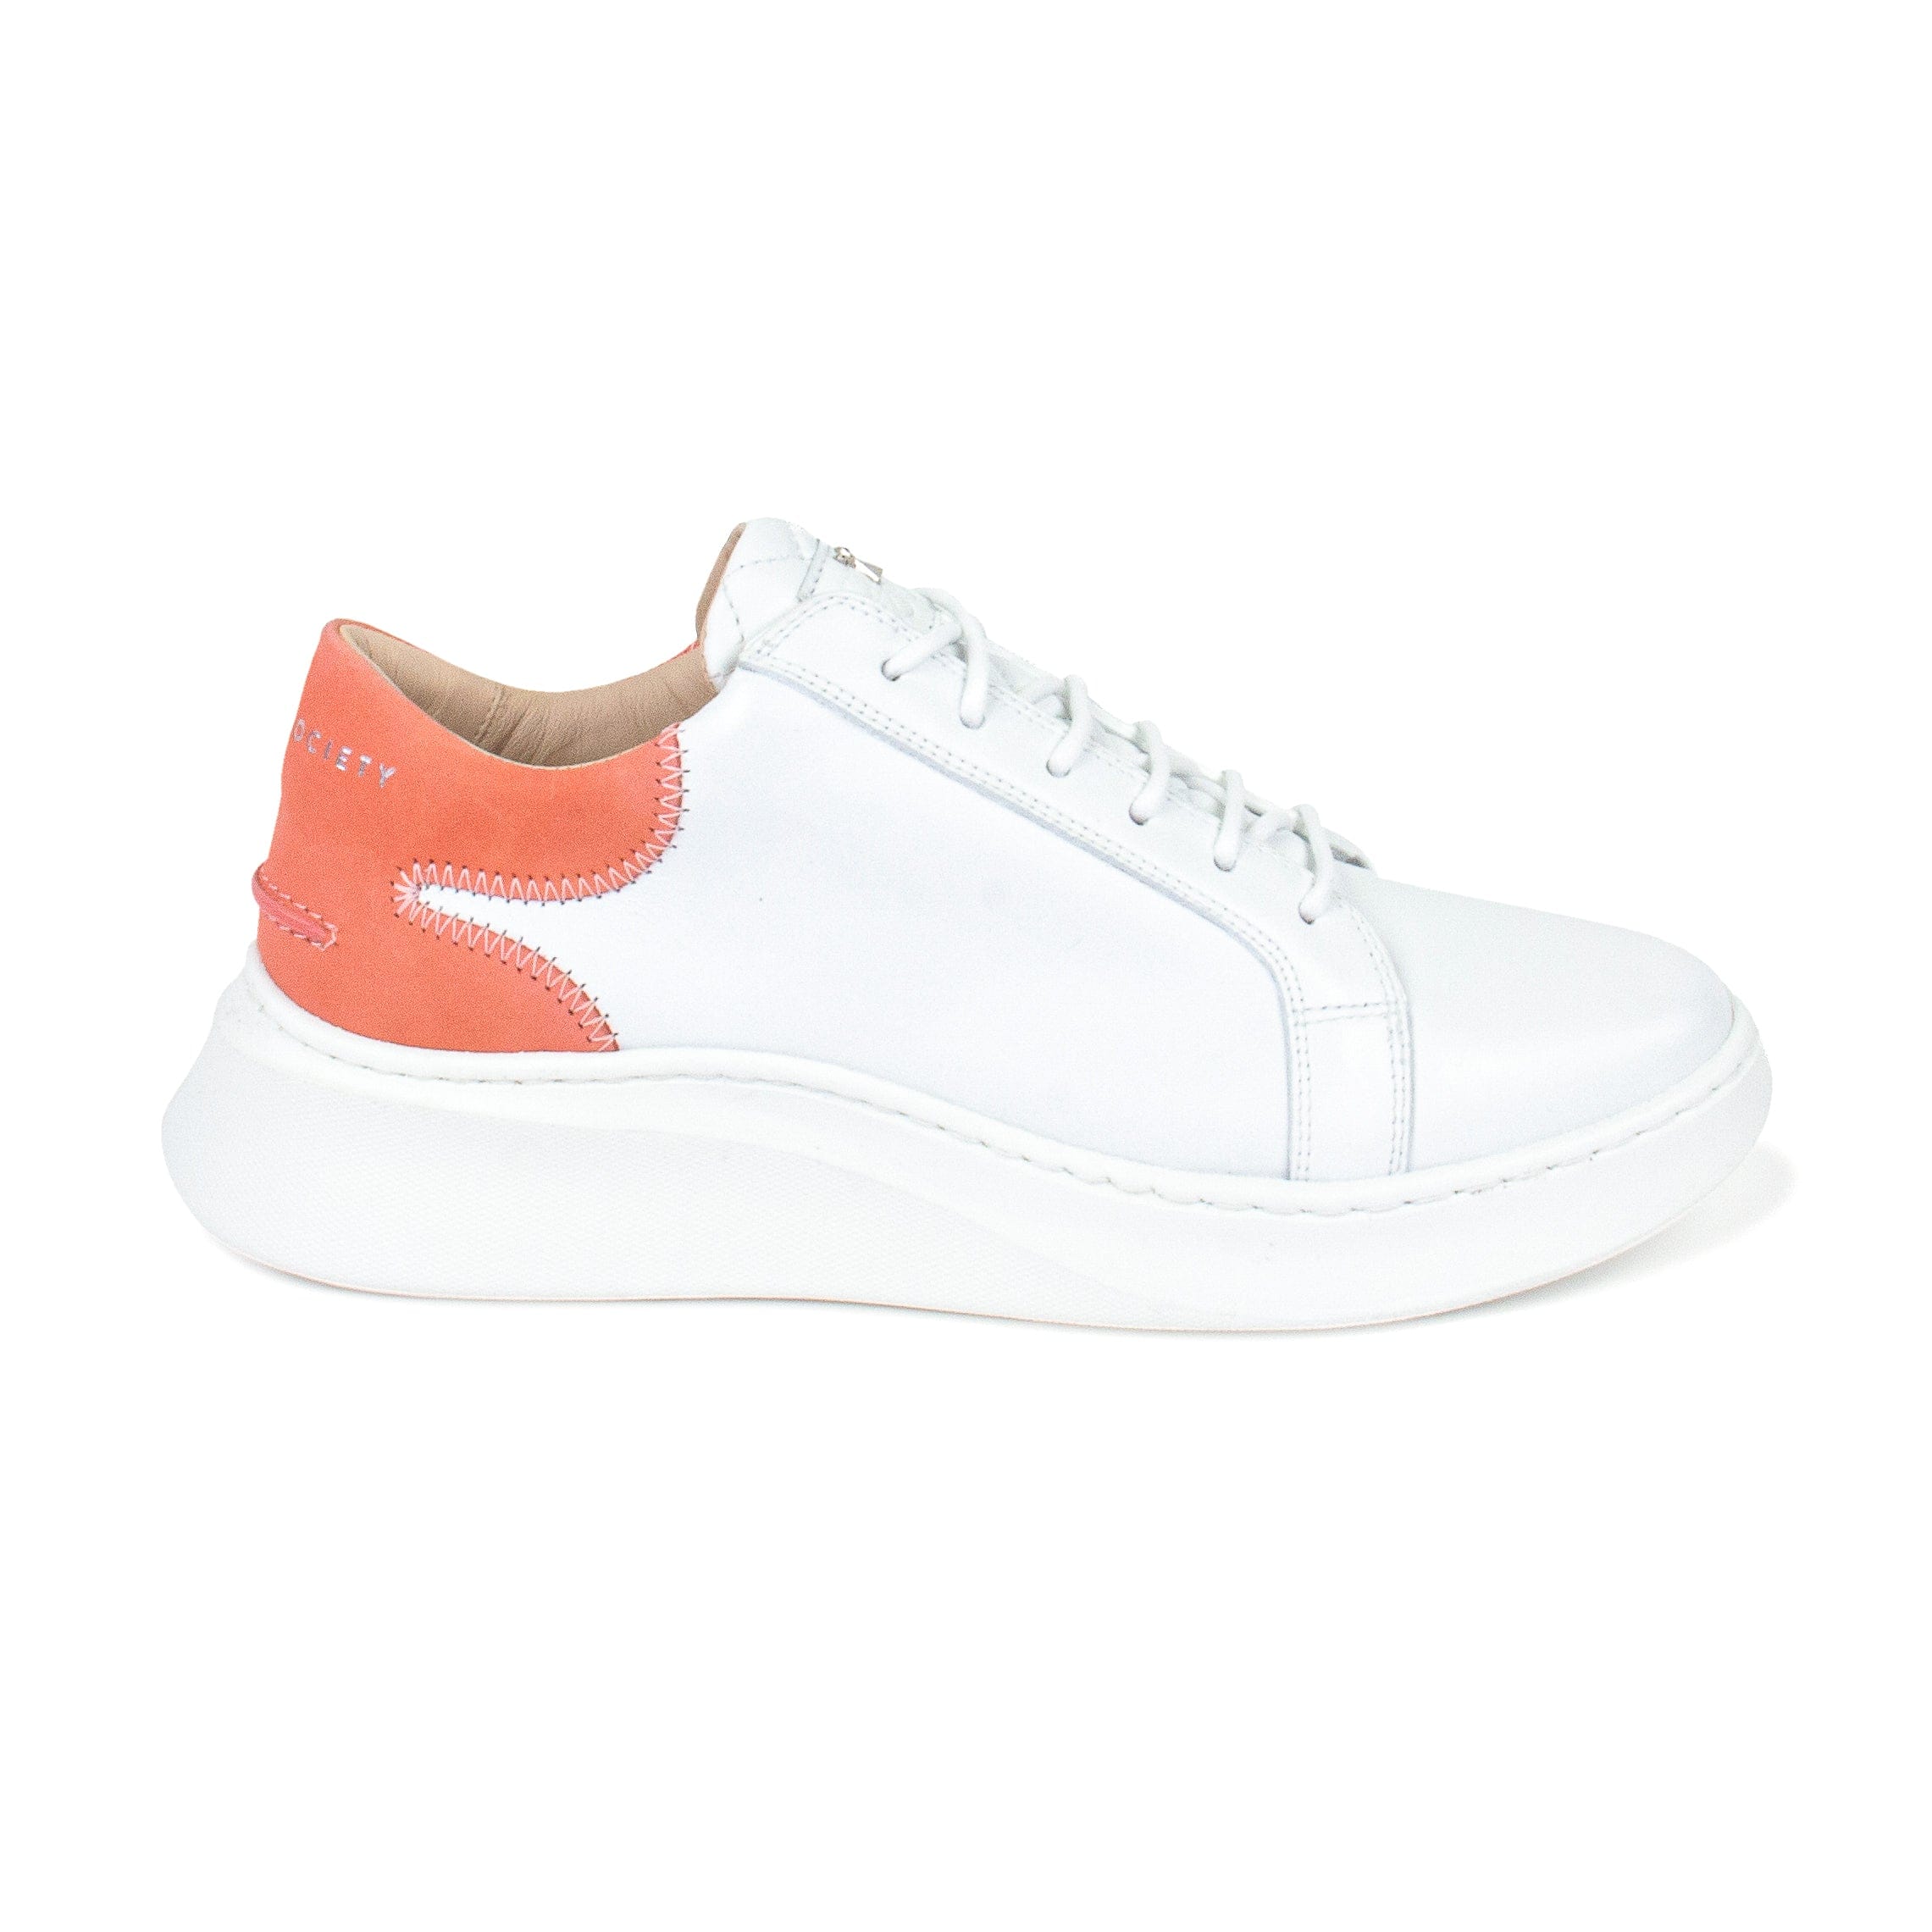 Matteo Low Top Sneaker | White & Pink Full Grain Leather | White Outsole | Made in Italy